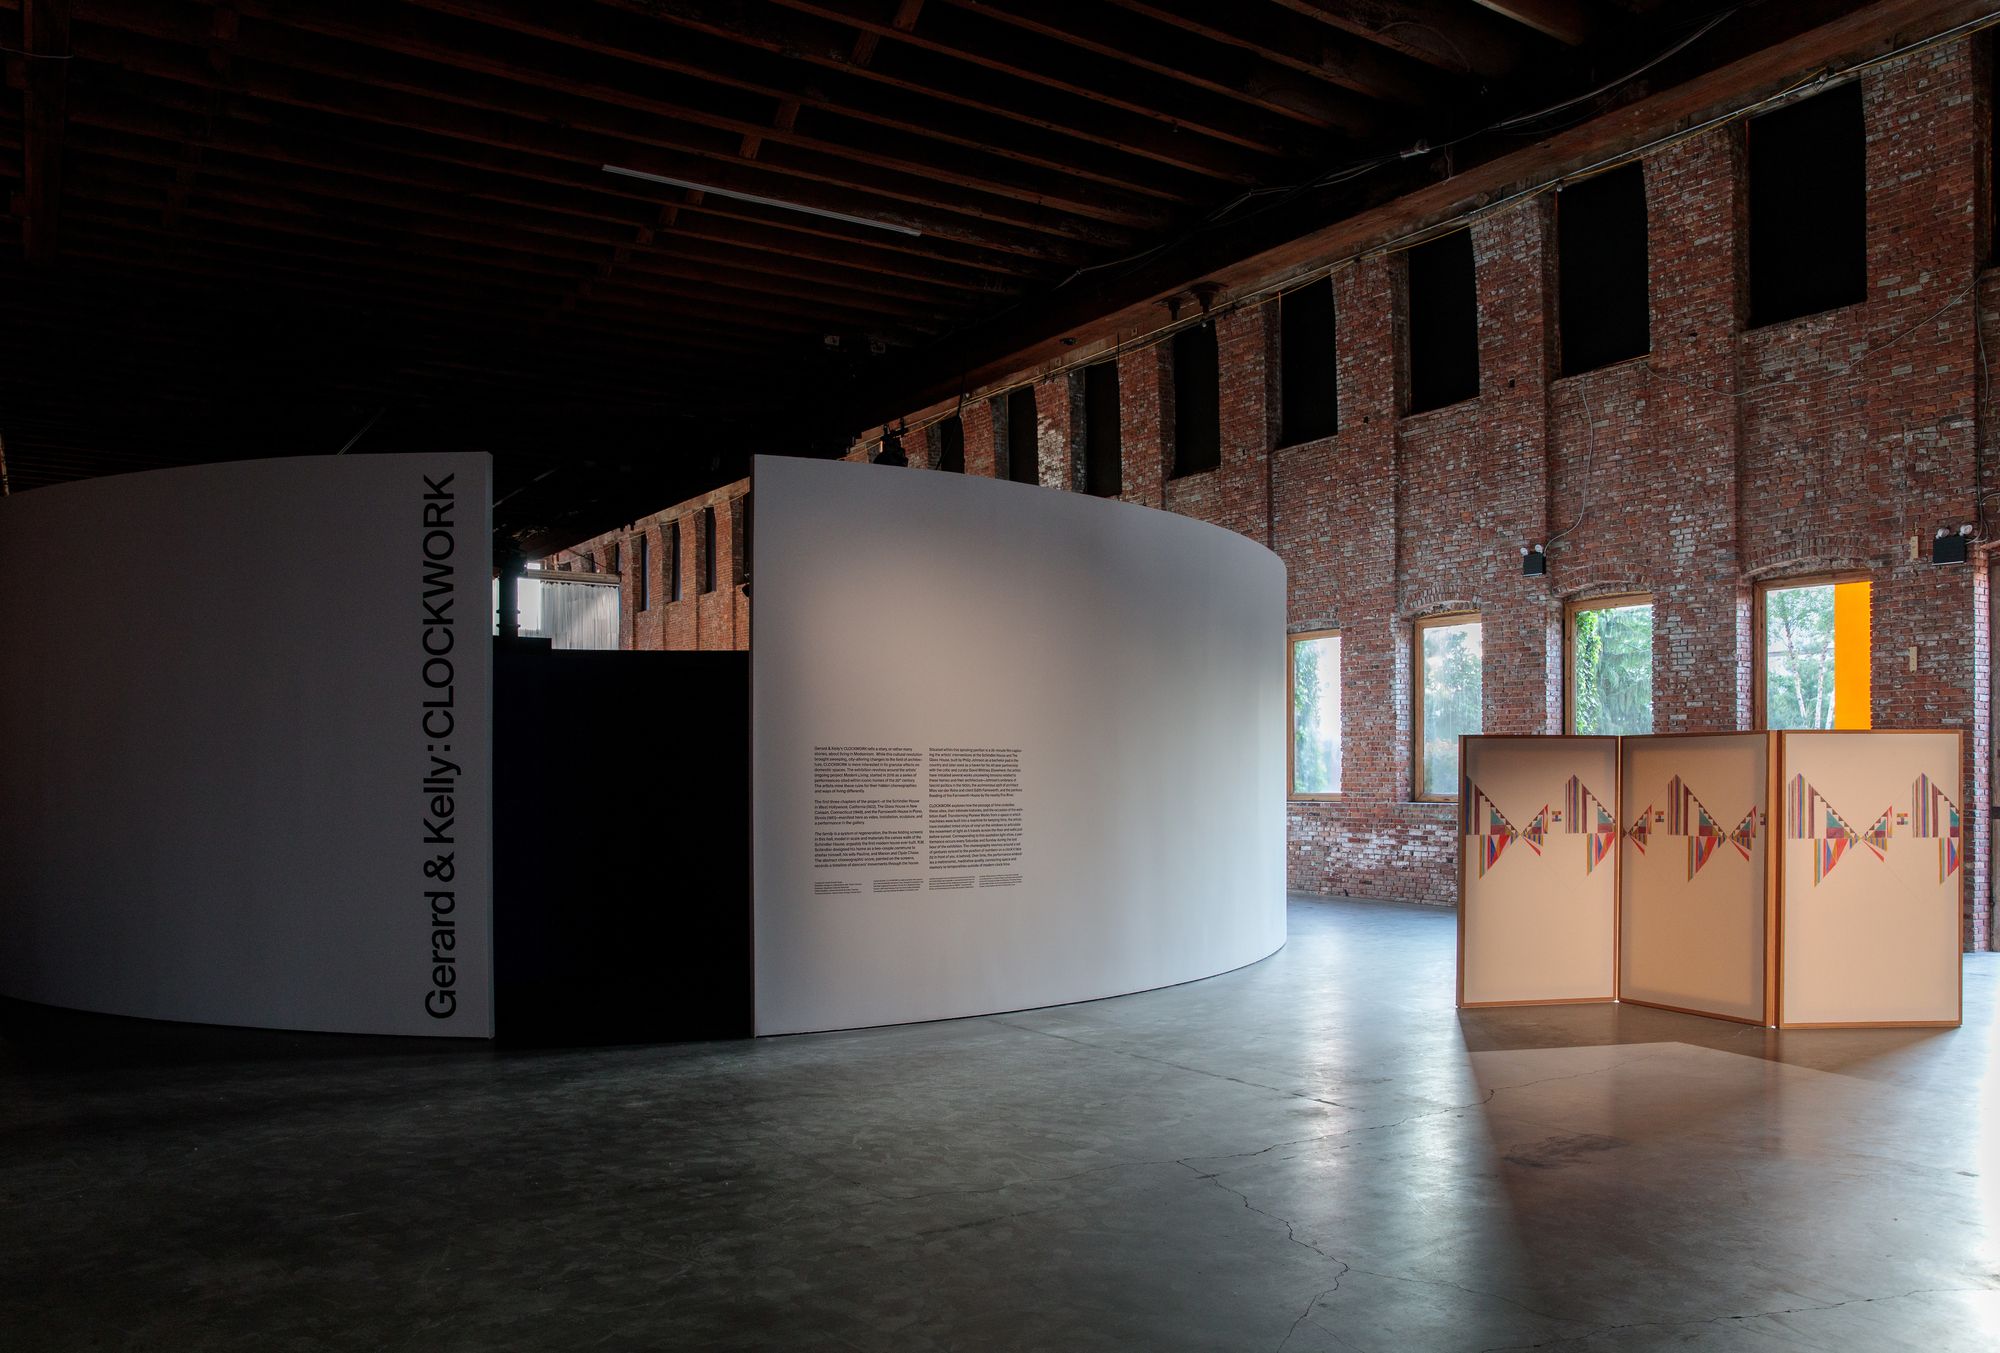 An installation view of the entrance of CLOCKWORK, featuring the entrance to the round-walled video room to the left, and a human-sized folding screen painted in pastels to the right.